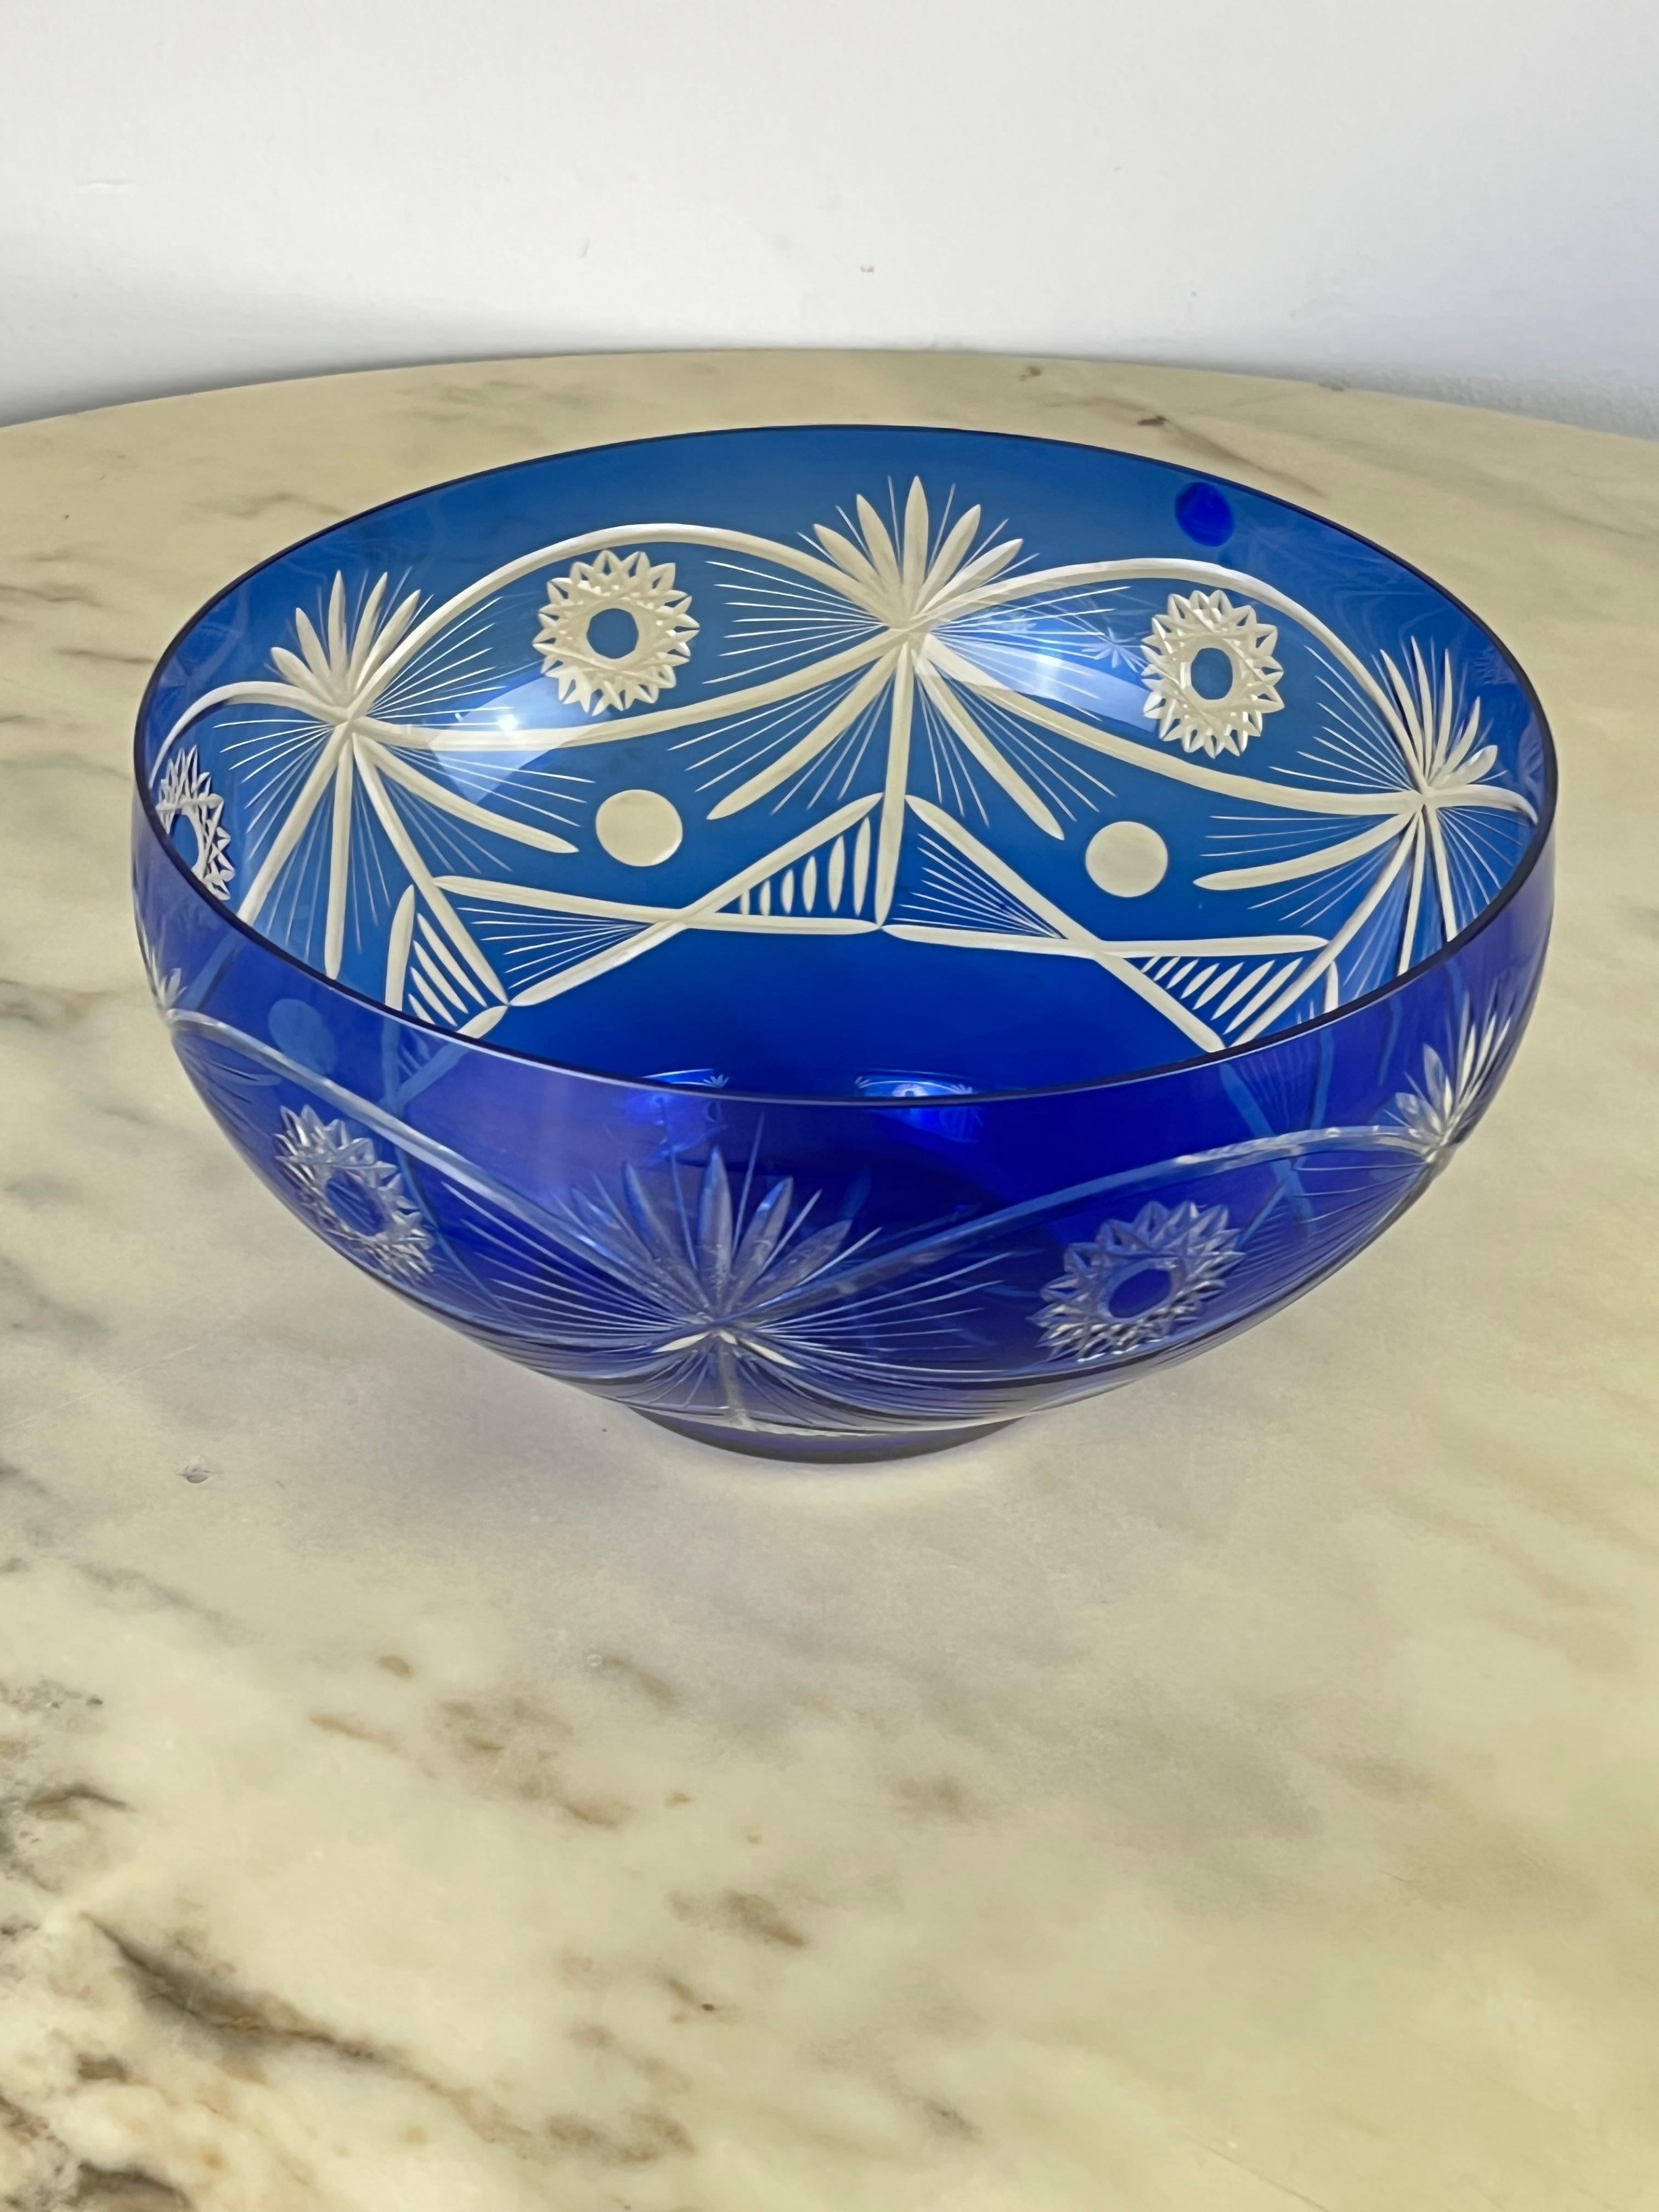 
Vintage blue crystal centerpiece , Italy, 1980s
Found in a gift shop in my city, which closed in 1986. It is intact and in perfect condition.